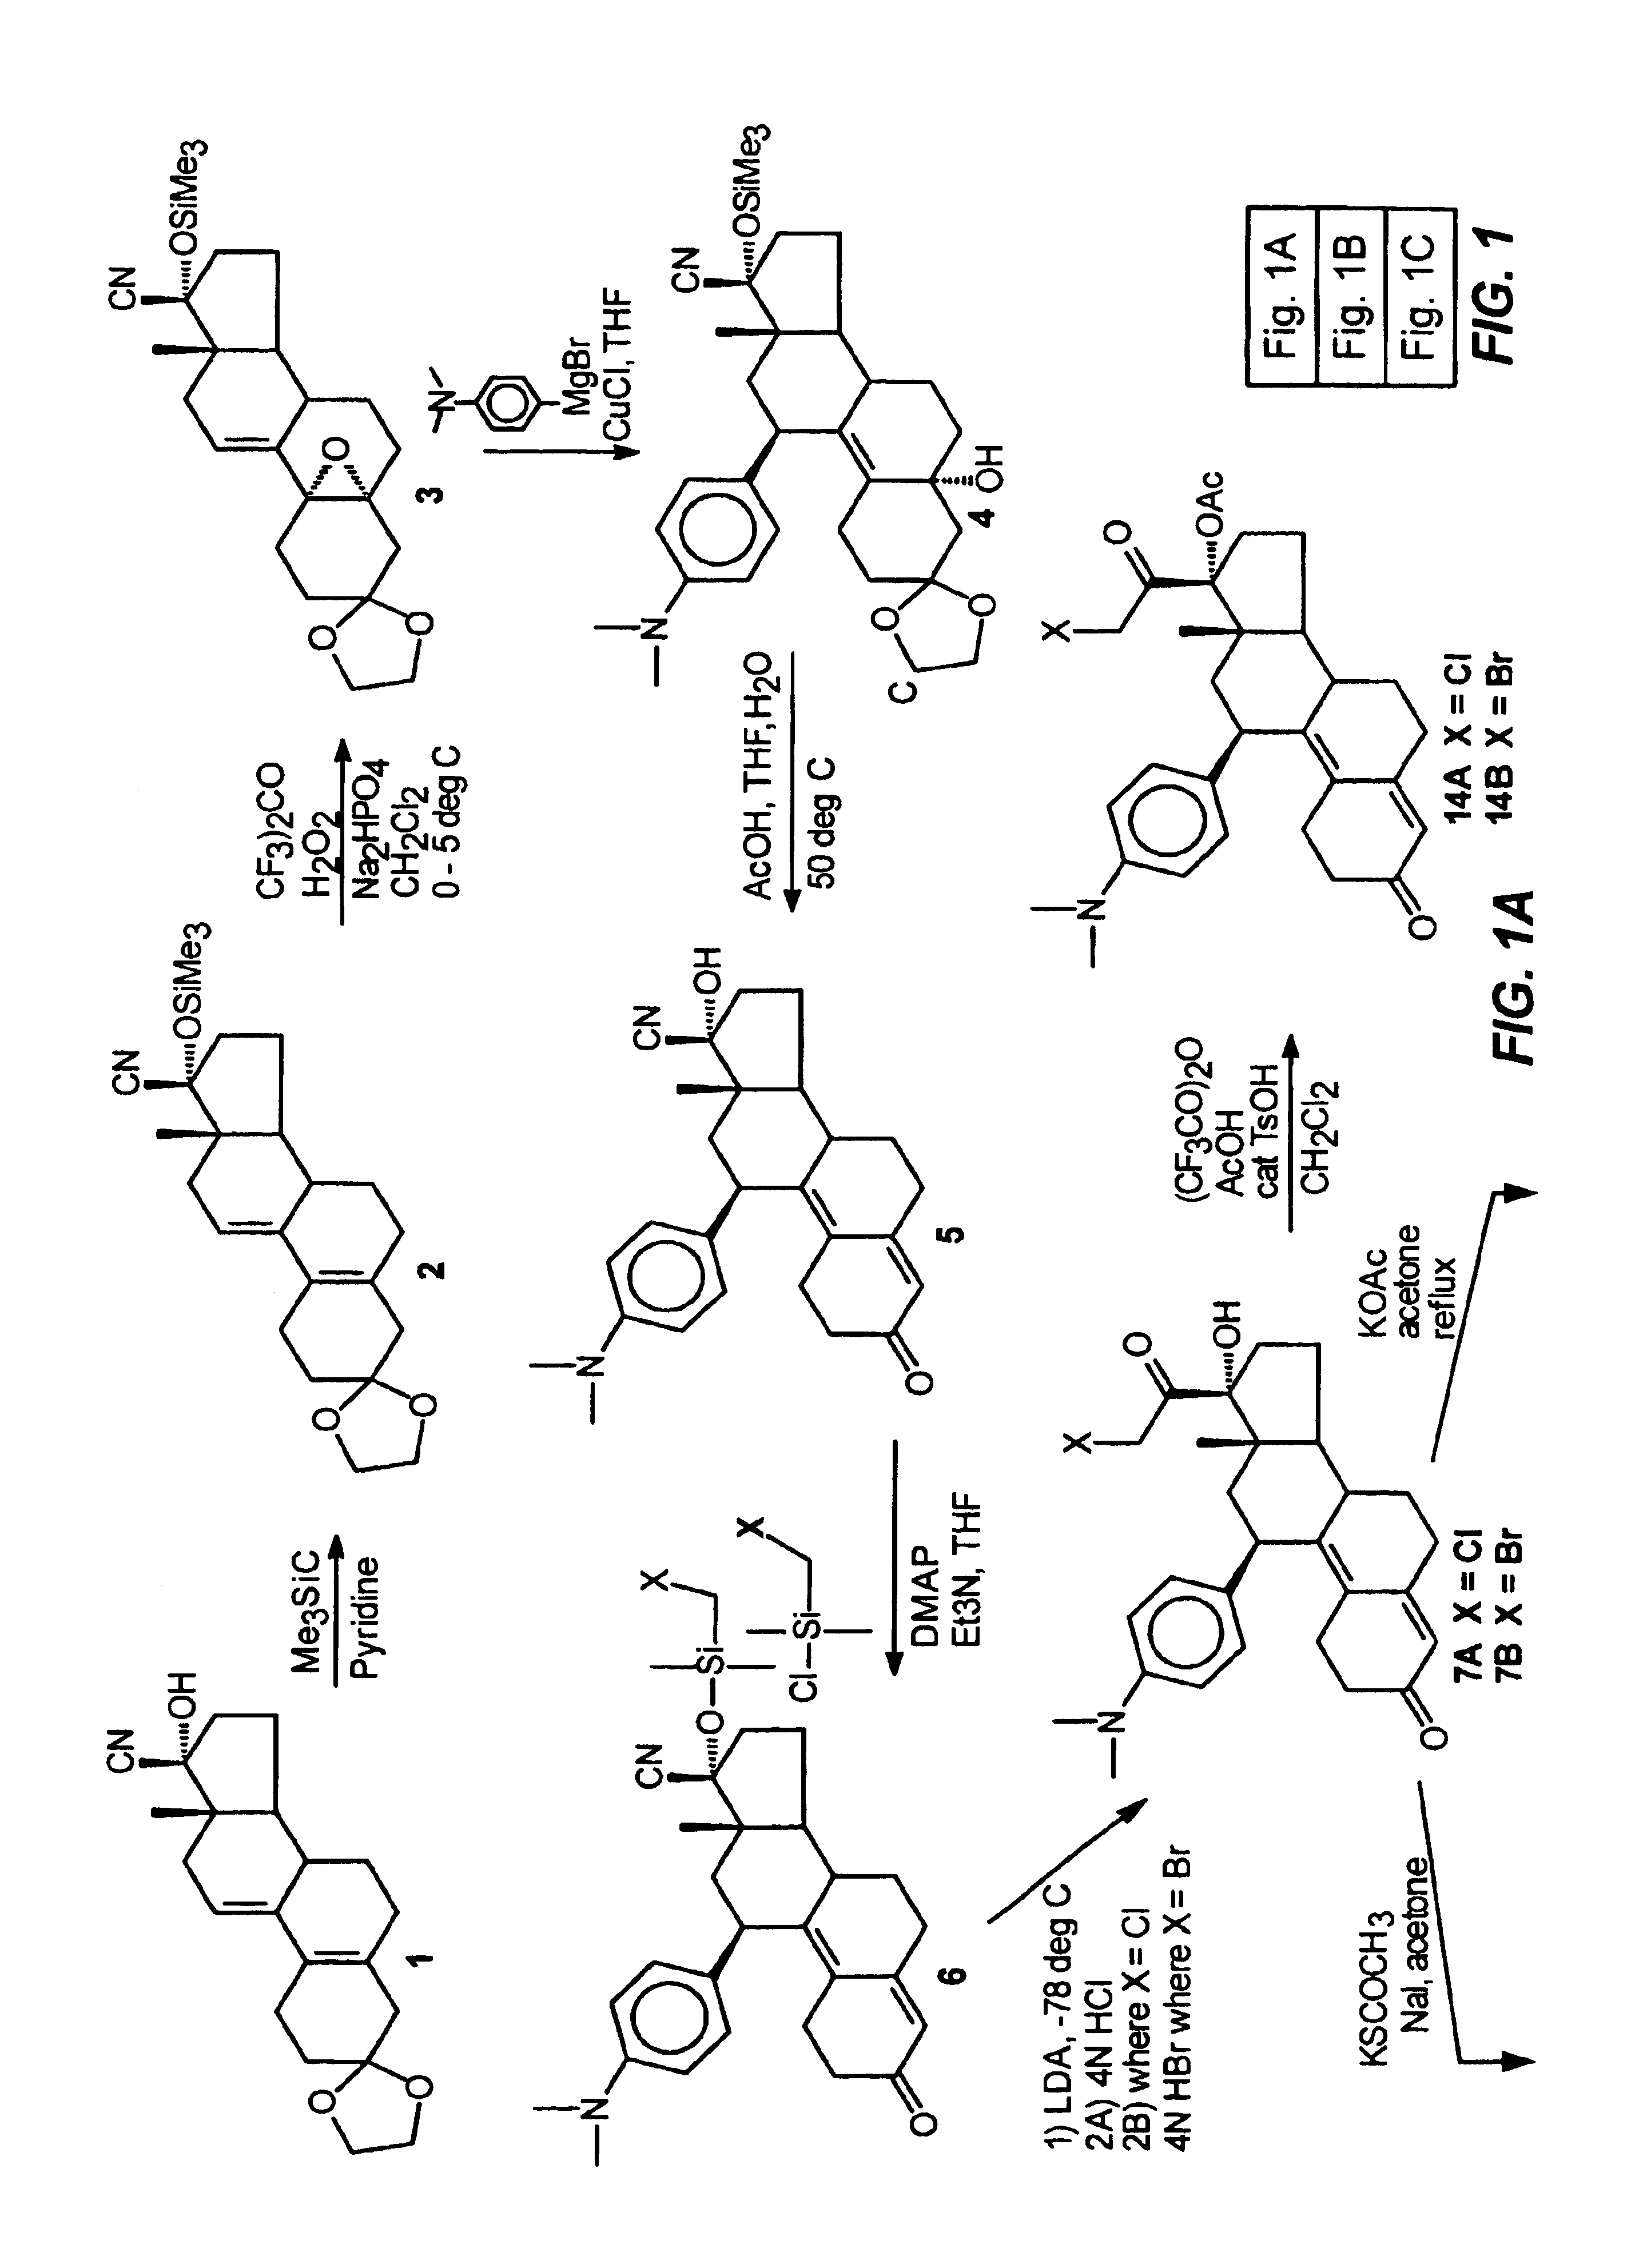 Structural modification of 19-norprogesterone I: 17-α-substituted-11-β-substituted-4-aryl and 21-substituted 19-norpregnadienedione as new antiprogestational agents